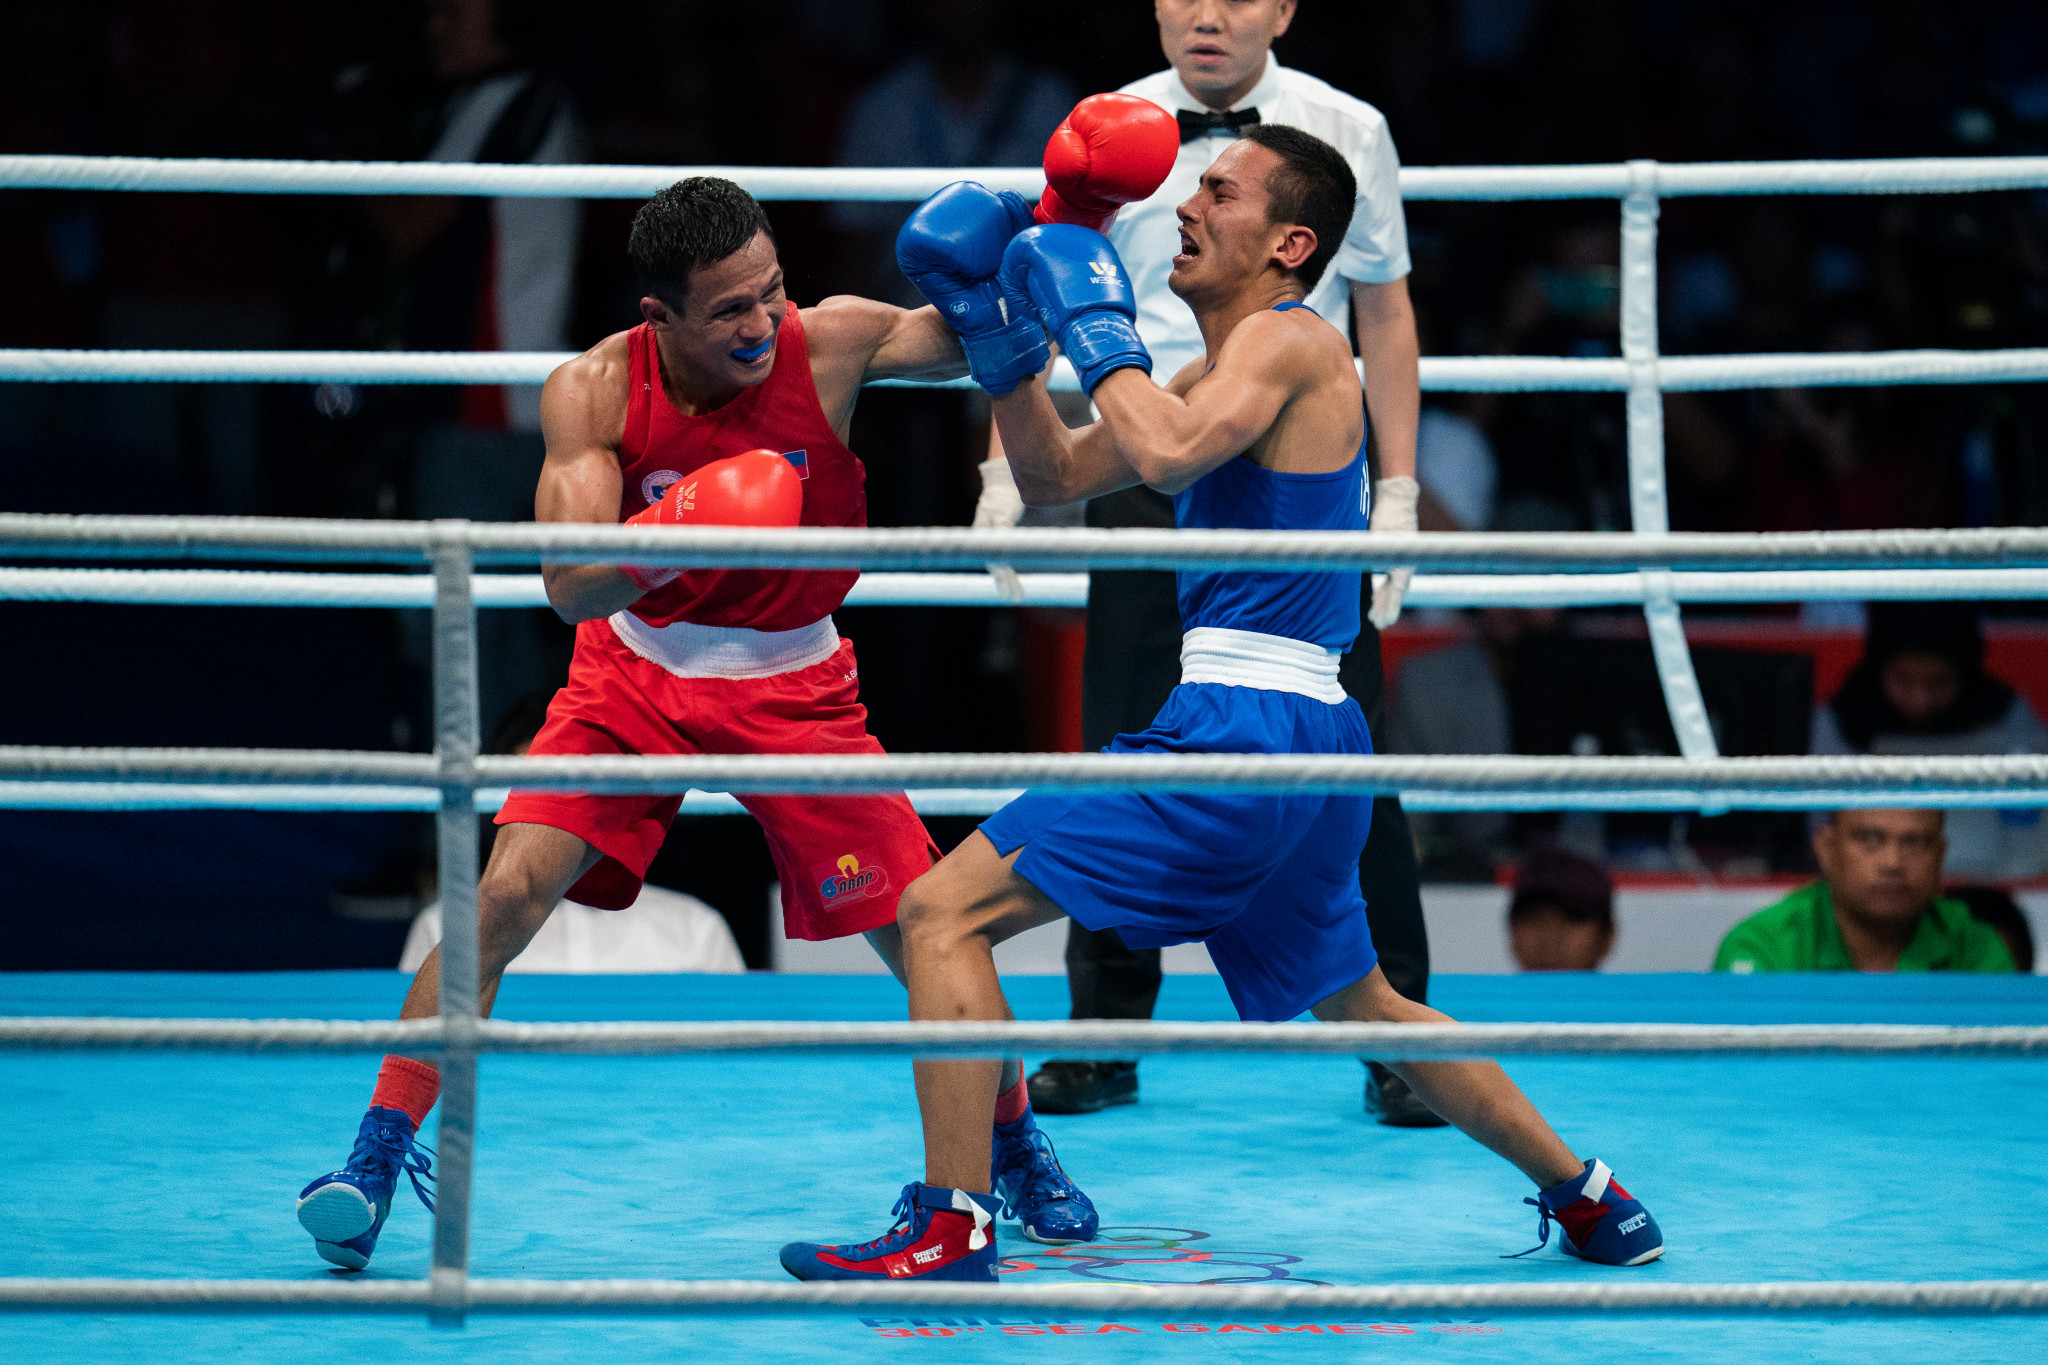 Asia has a rich history in the sport, claiming more than 100 boxing medals at the Olympic Games ©Getty Images